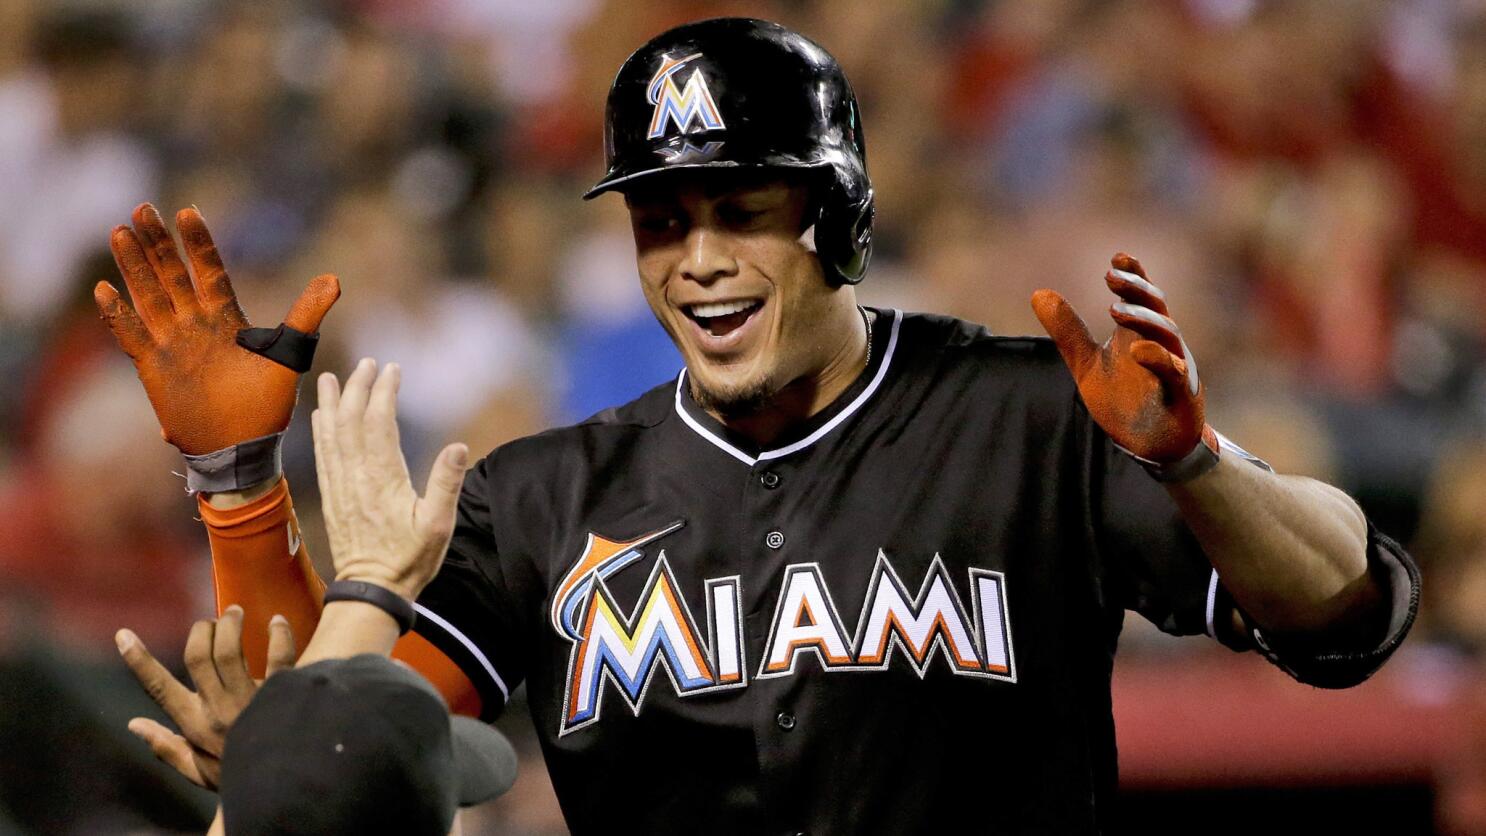 Marlins' Giancarlo Stanton likely out for year